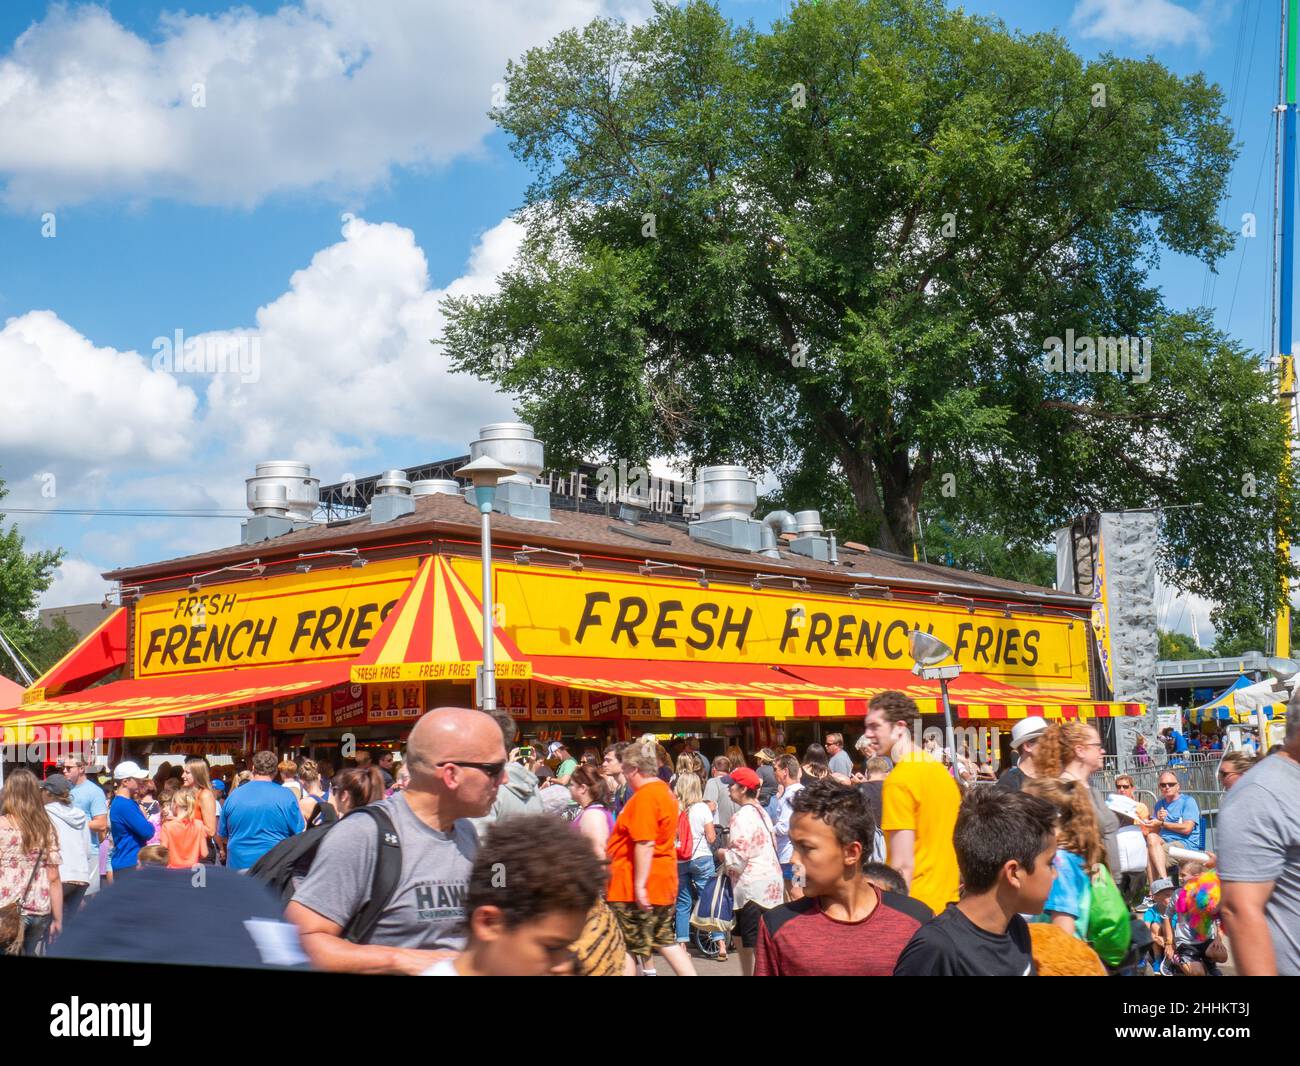 FALCON HEIGHTS, MN - 23 AUG 2019: State Fair French Fries food booth with crowds of people enoying themselves at the largest annual even in Minnesota. Stock Photo